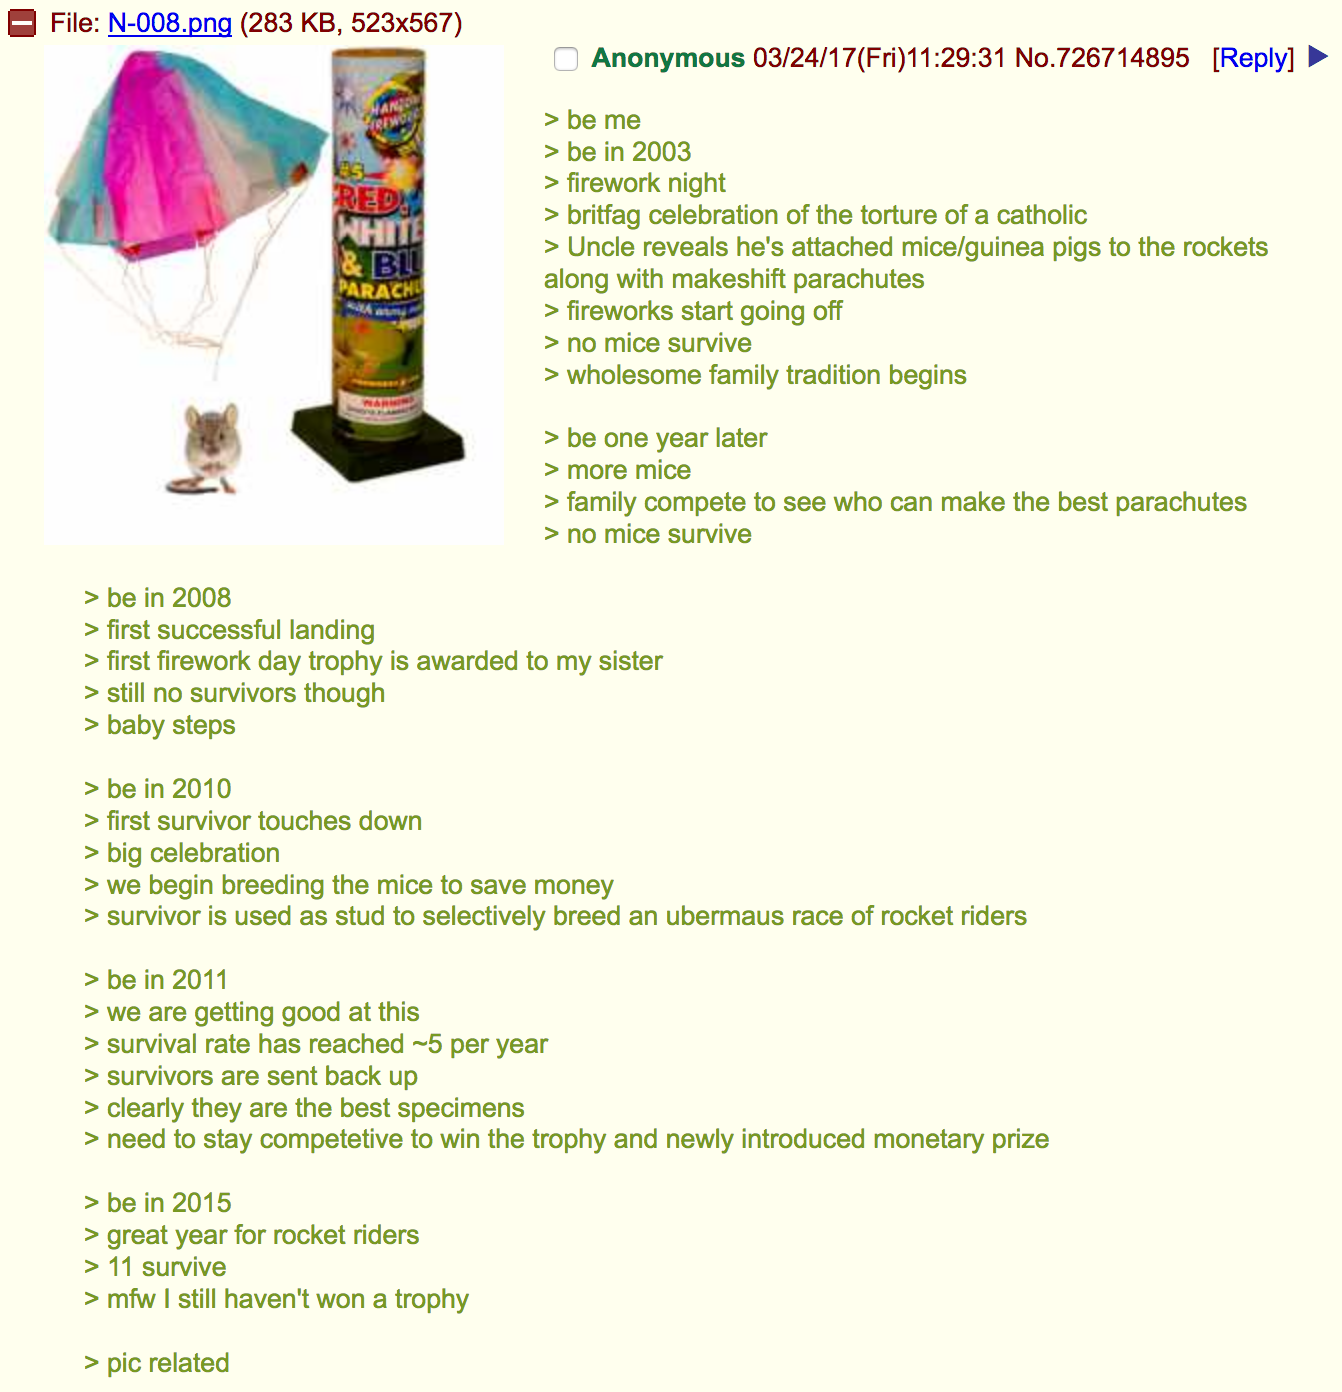 Anon's family tradition